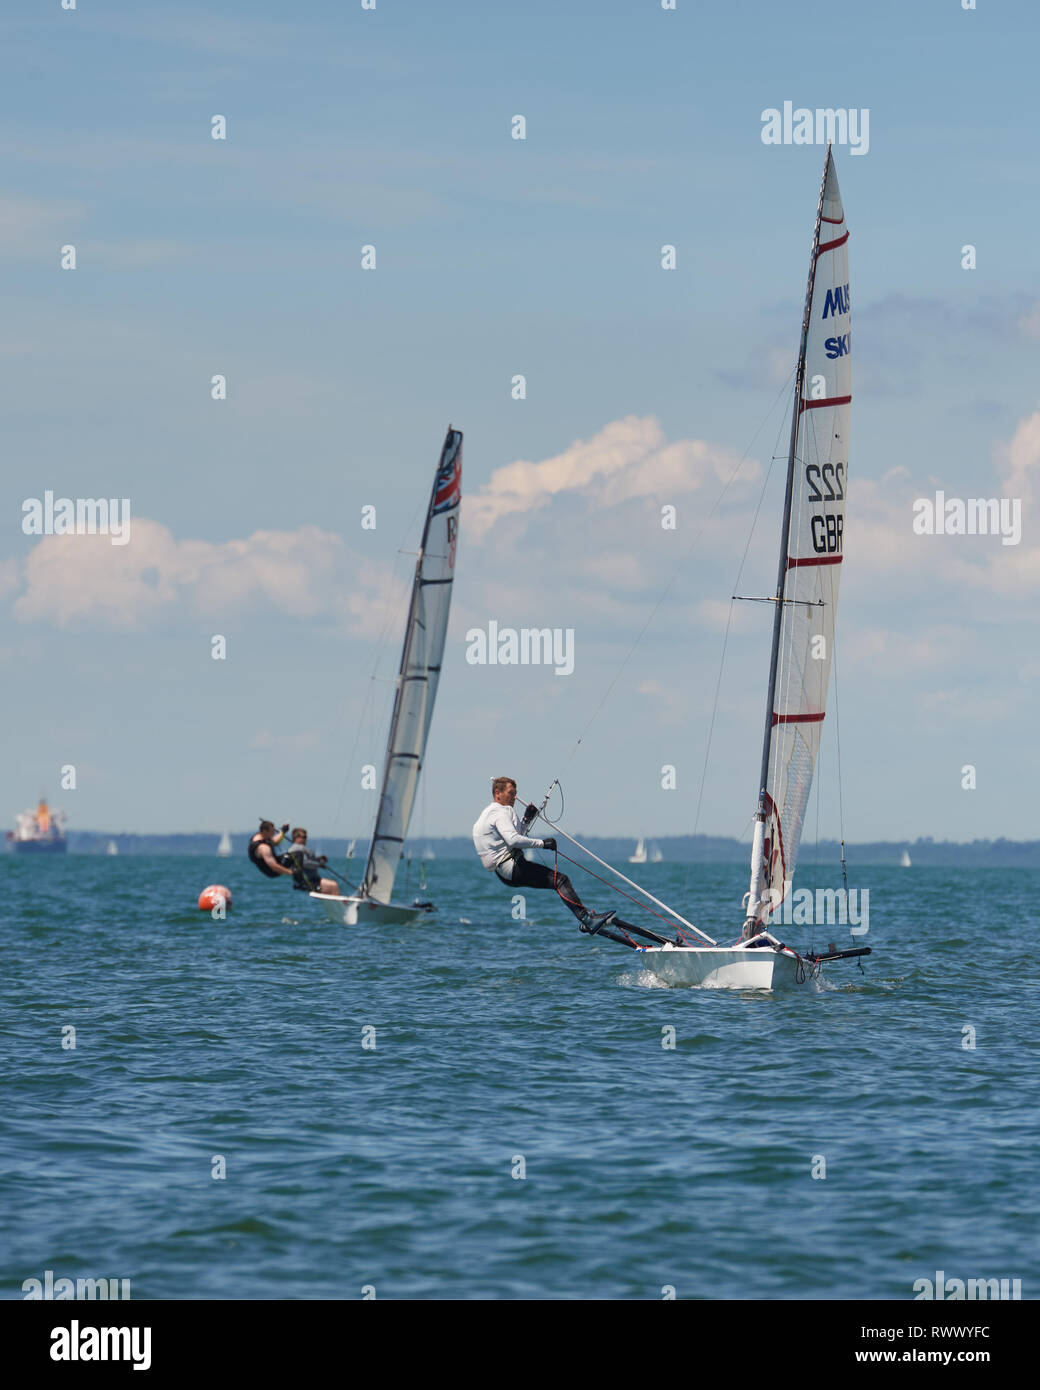 Musto one person trapeze, performance Skiff racing upwind. An exhilaration sport. Stock Photo